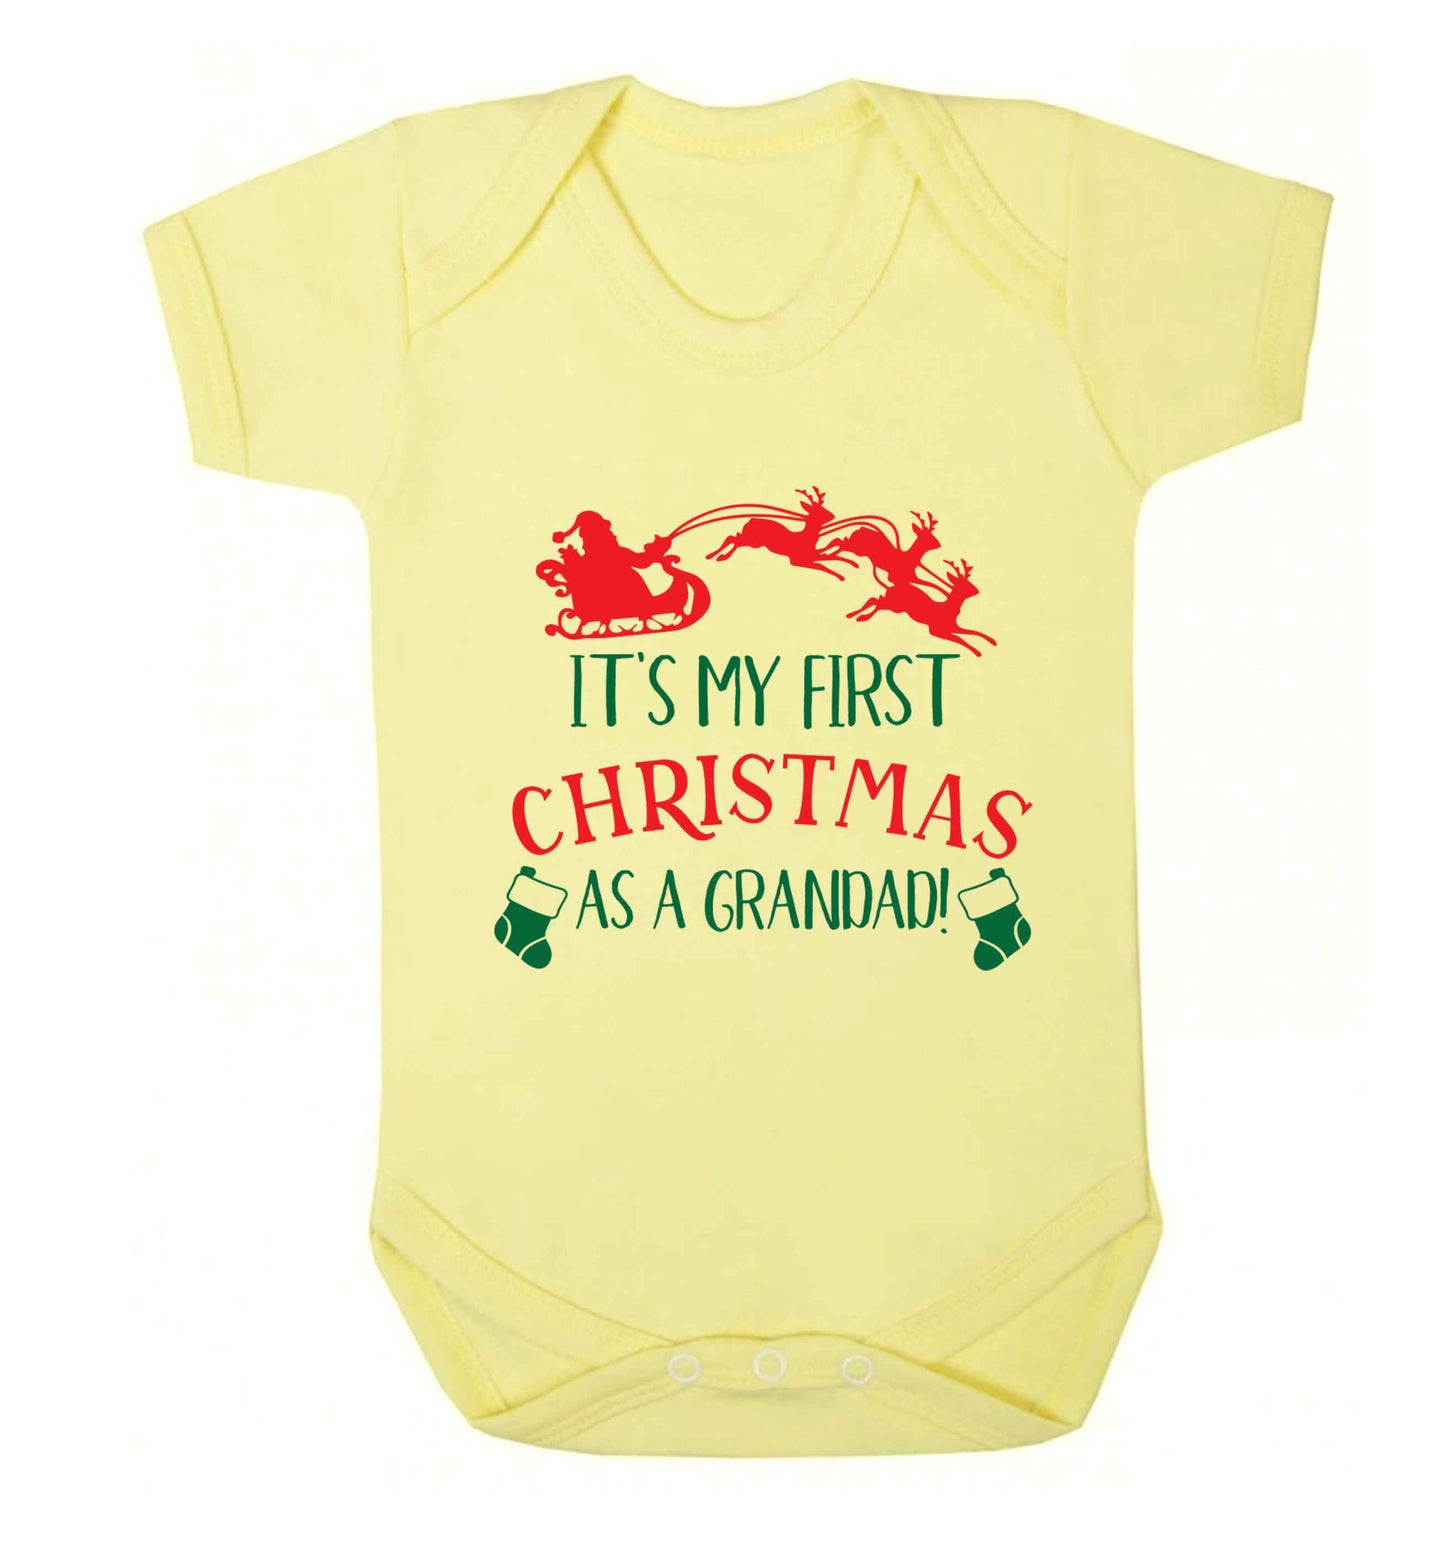 It's my first Christmas as a grandad! Baby Vest pale yellow 18-24 months